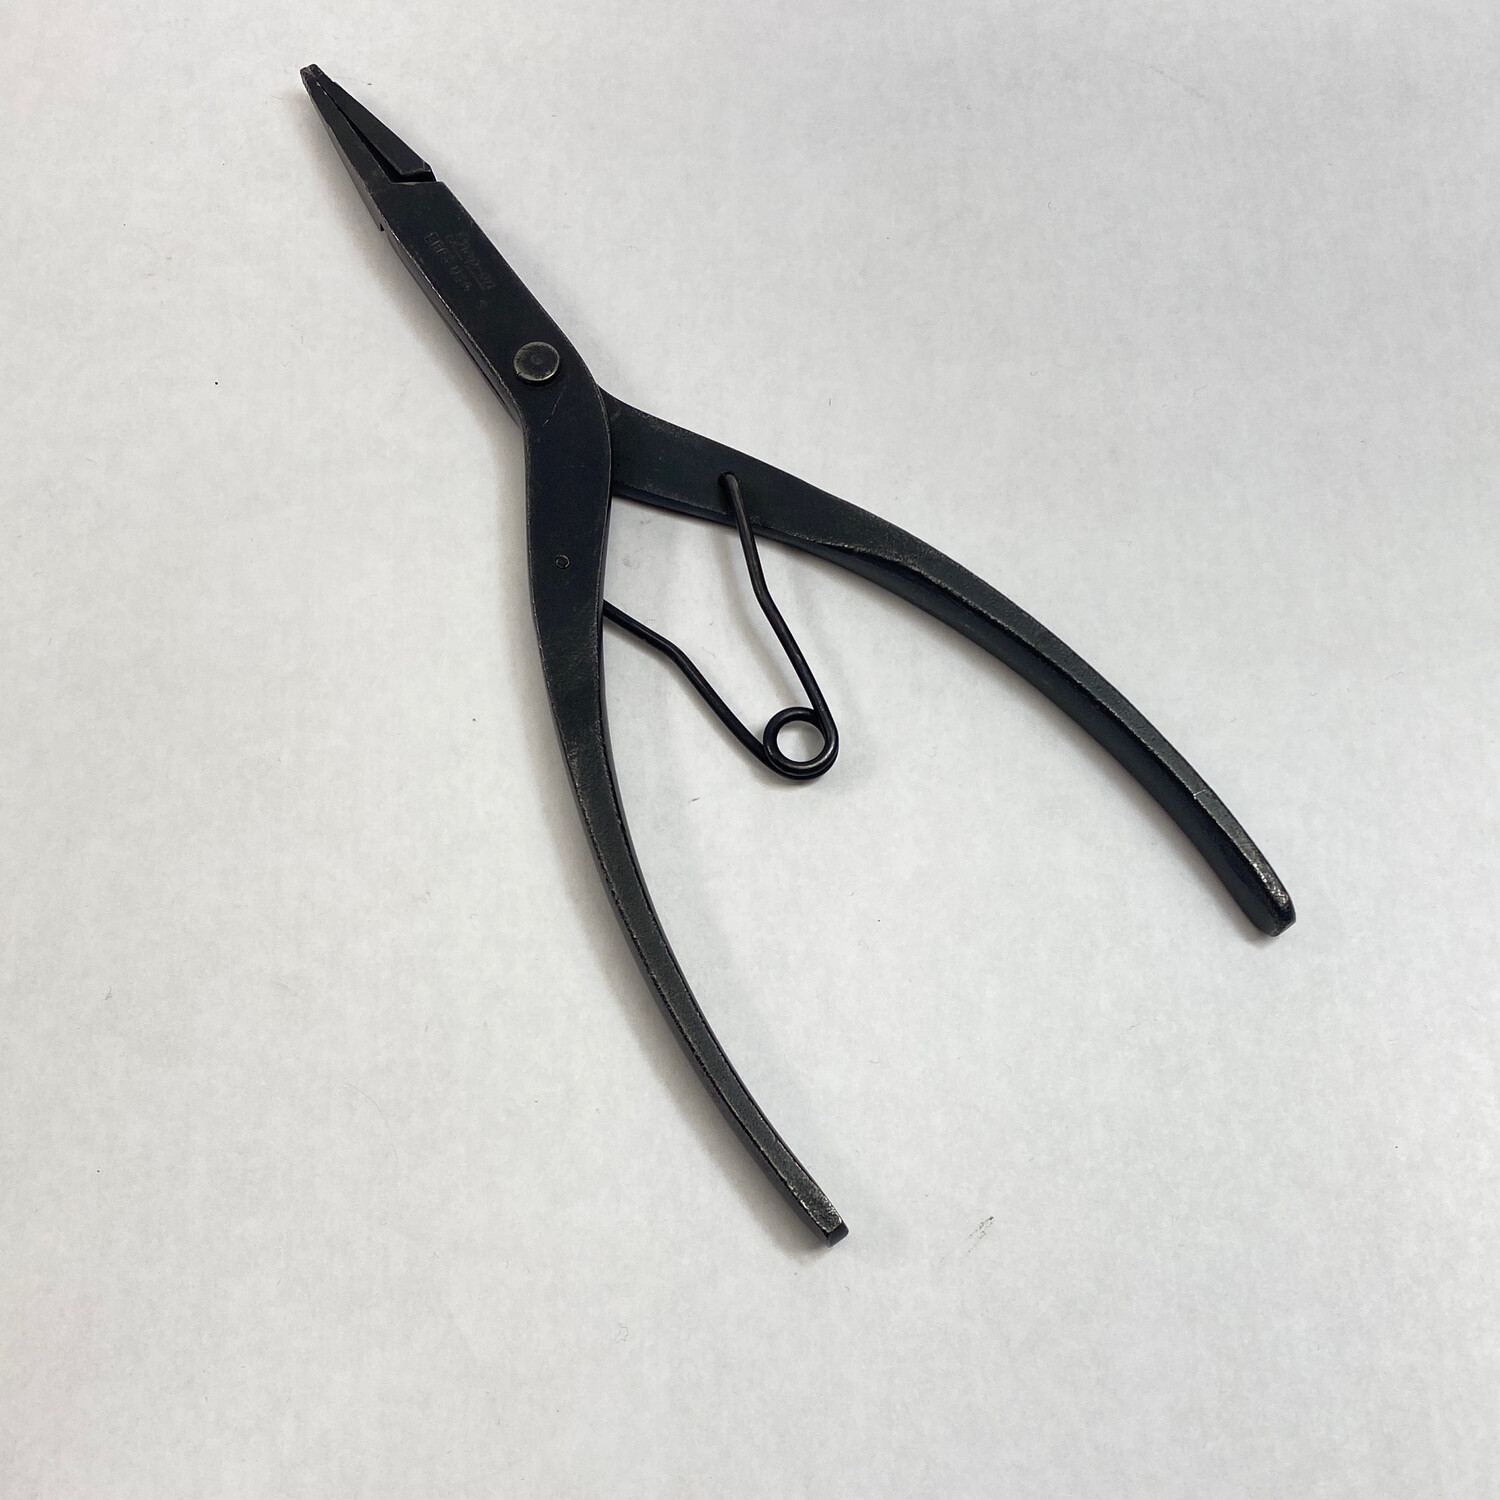 Snap On Snap Ring Pliers, SRP3